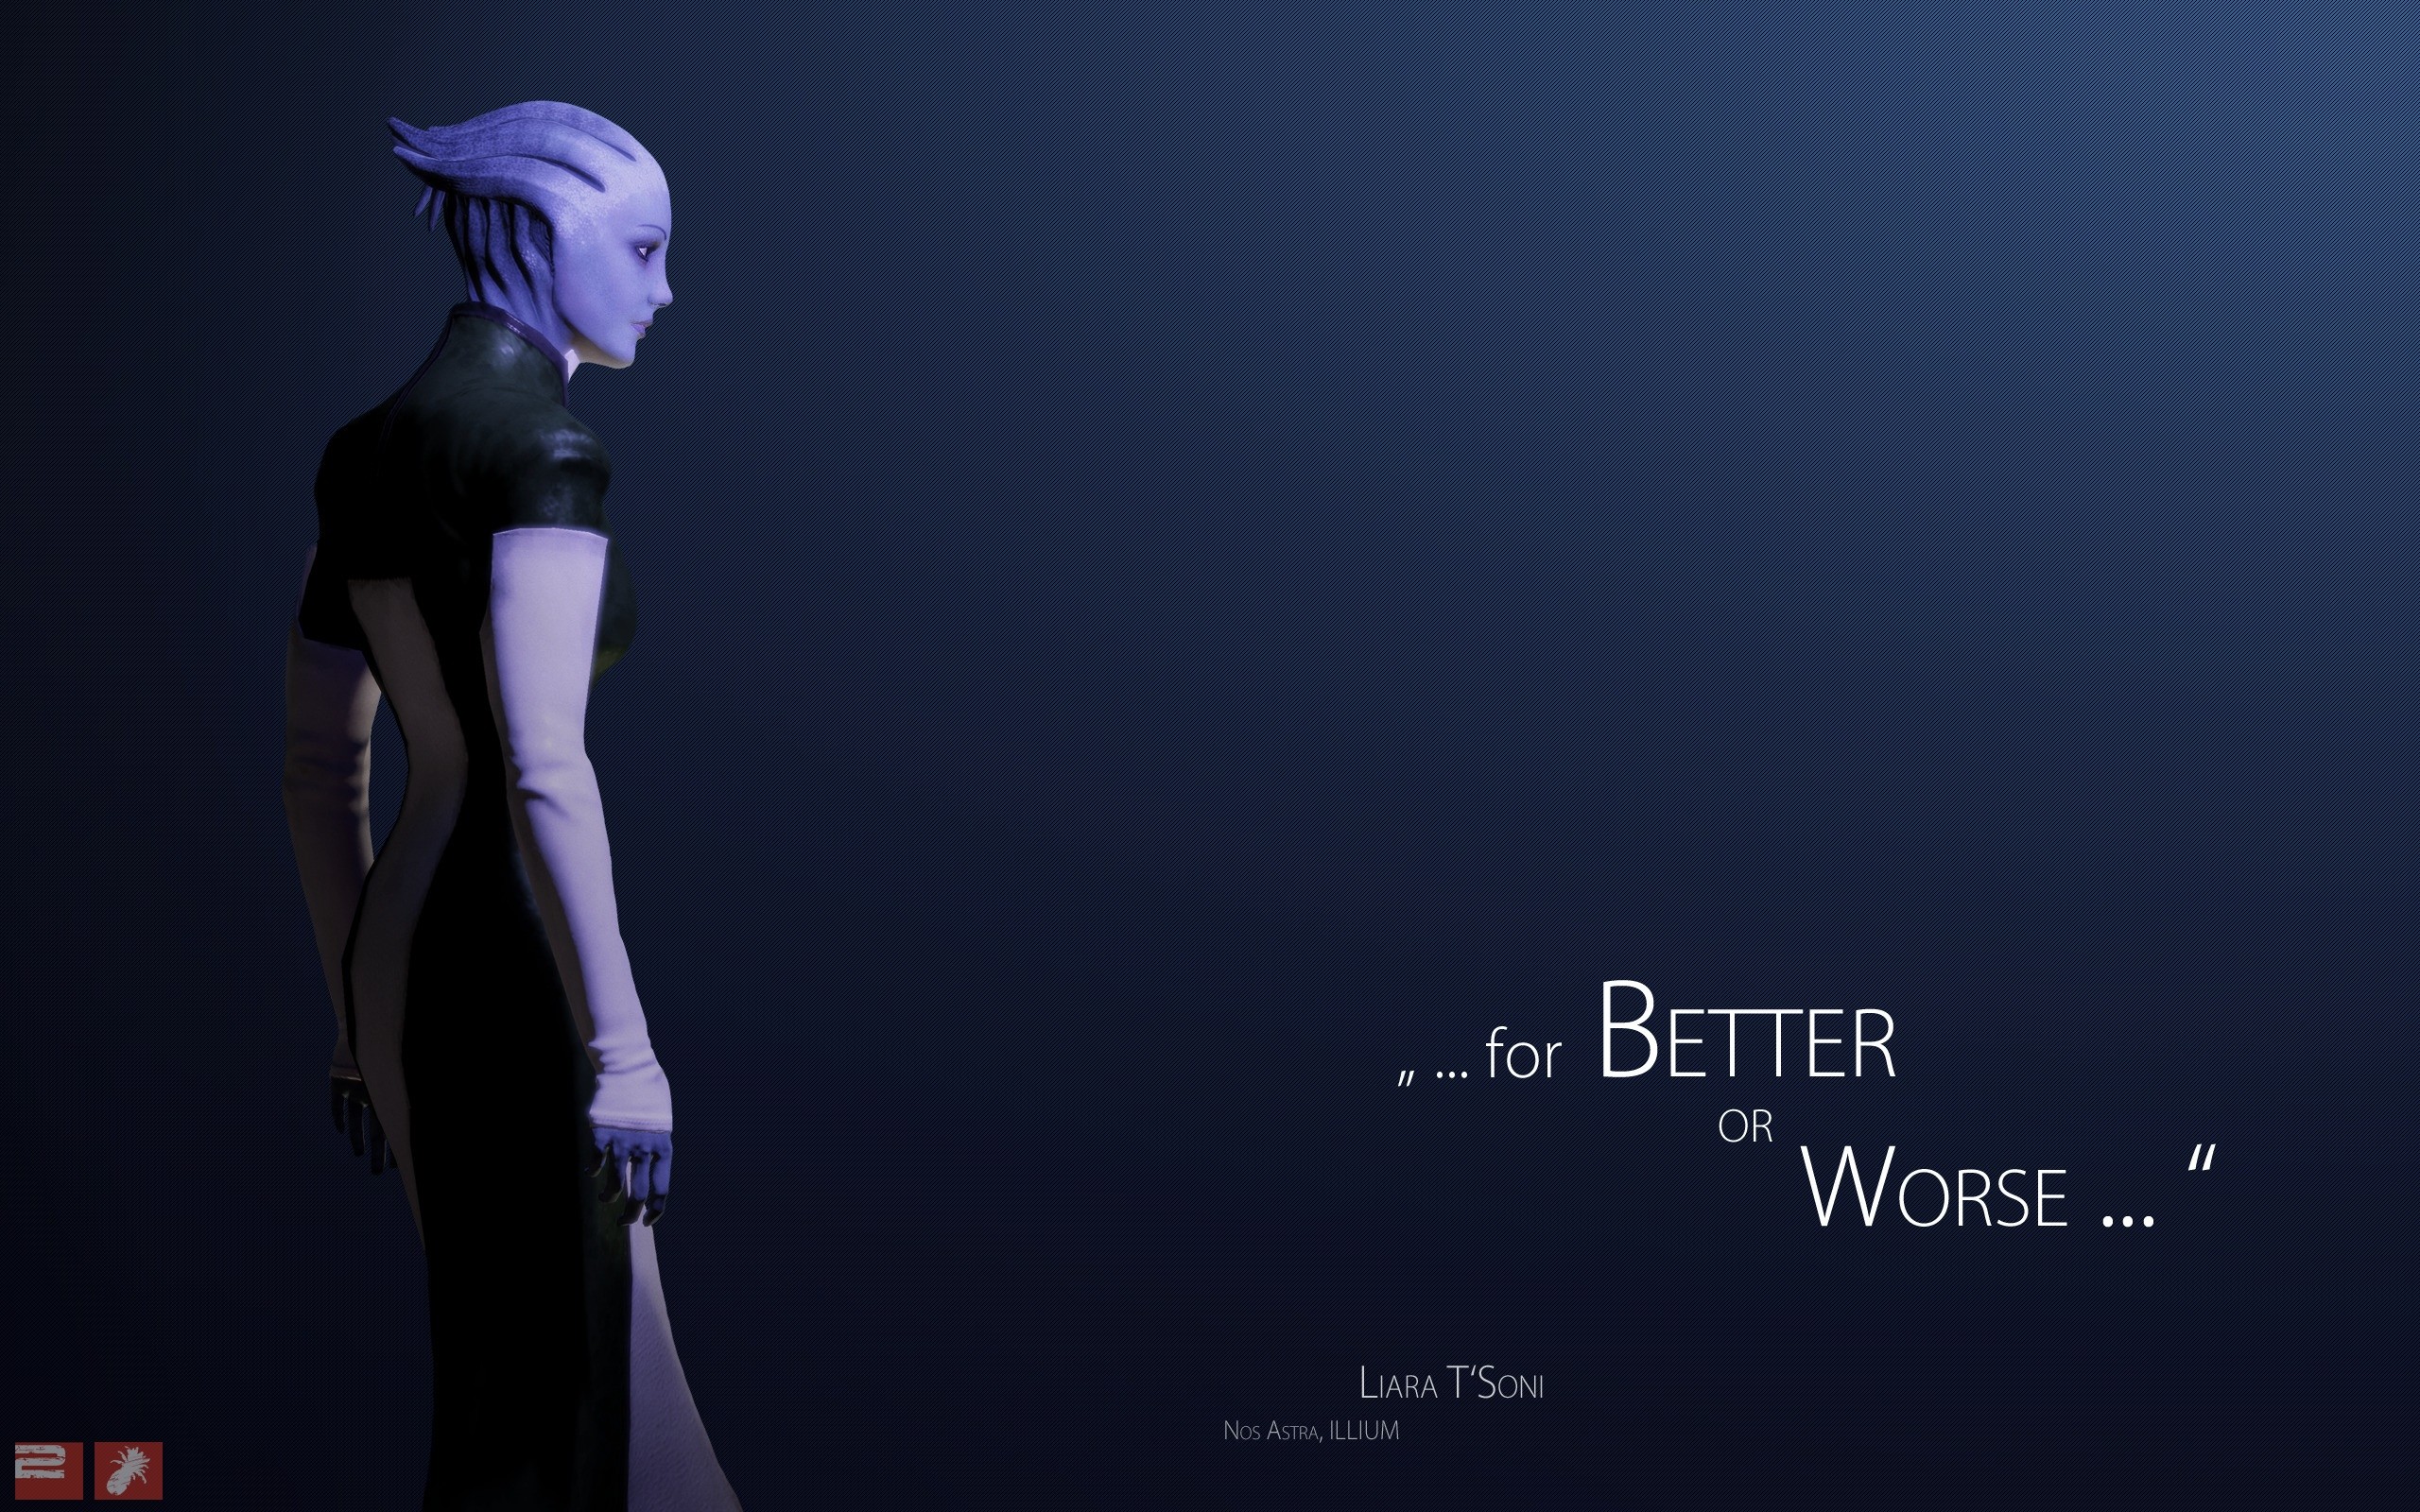 2560x1600 Mass Effect Rp images Dr Liara T'Soni HD wallpaper and background photos